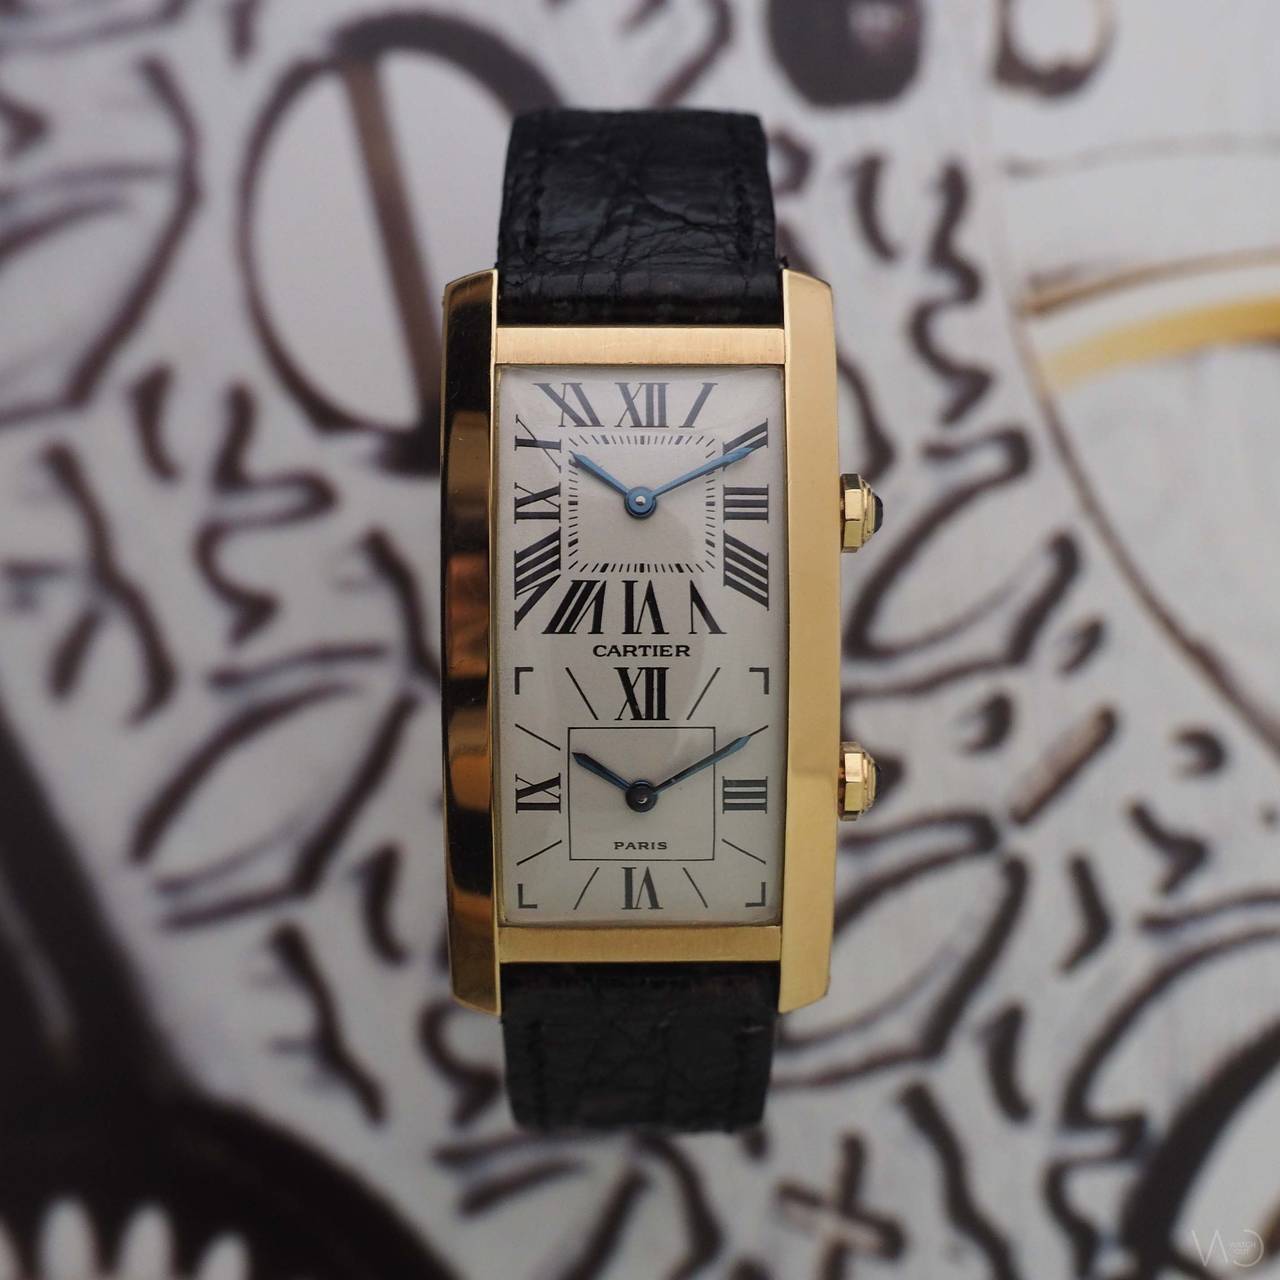 Cartier
Cartier Tank Cintrée Dual Time Zone
18K Yellow Gold Case
White Dial
18K Yellow Gold Original Deployante by Cartier
Manual Winding
Dimension: 24mm x 46mm
Year: About 1990

Accompanied by an Original Cartier Box